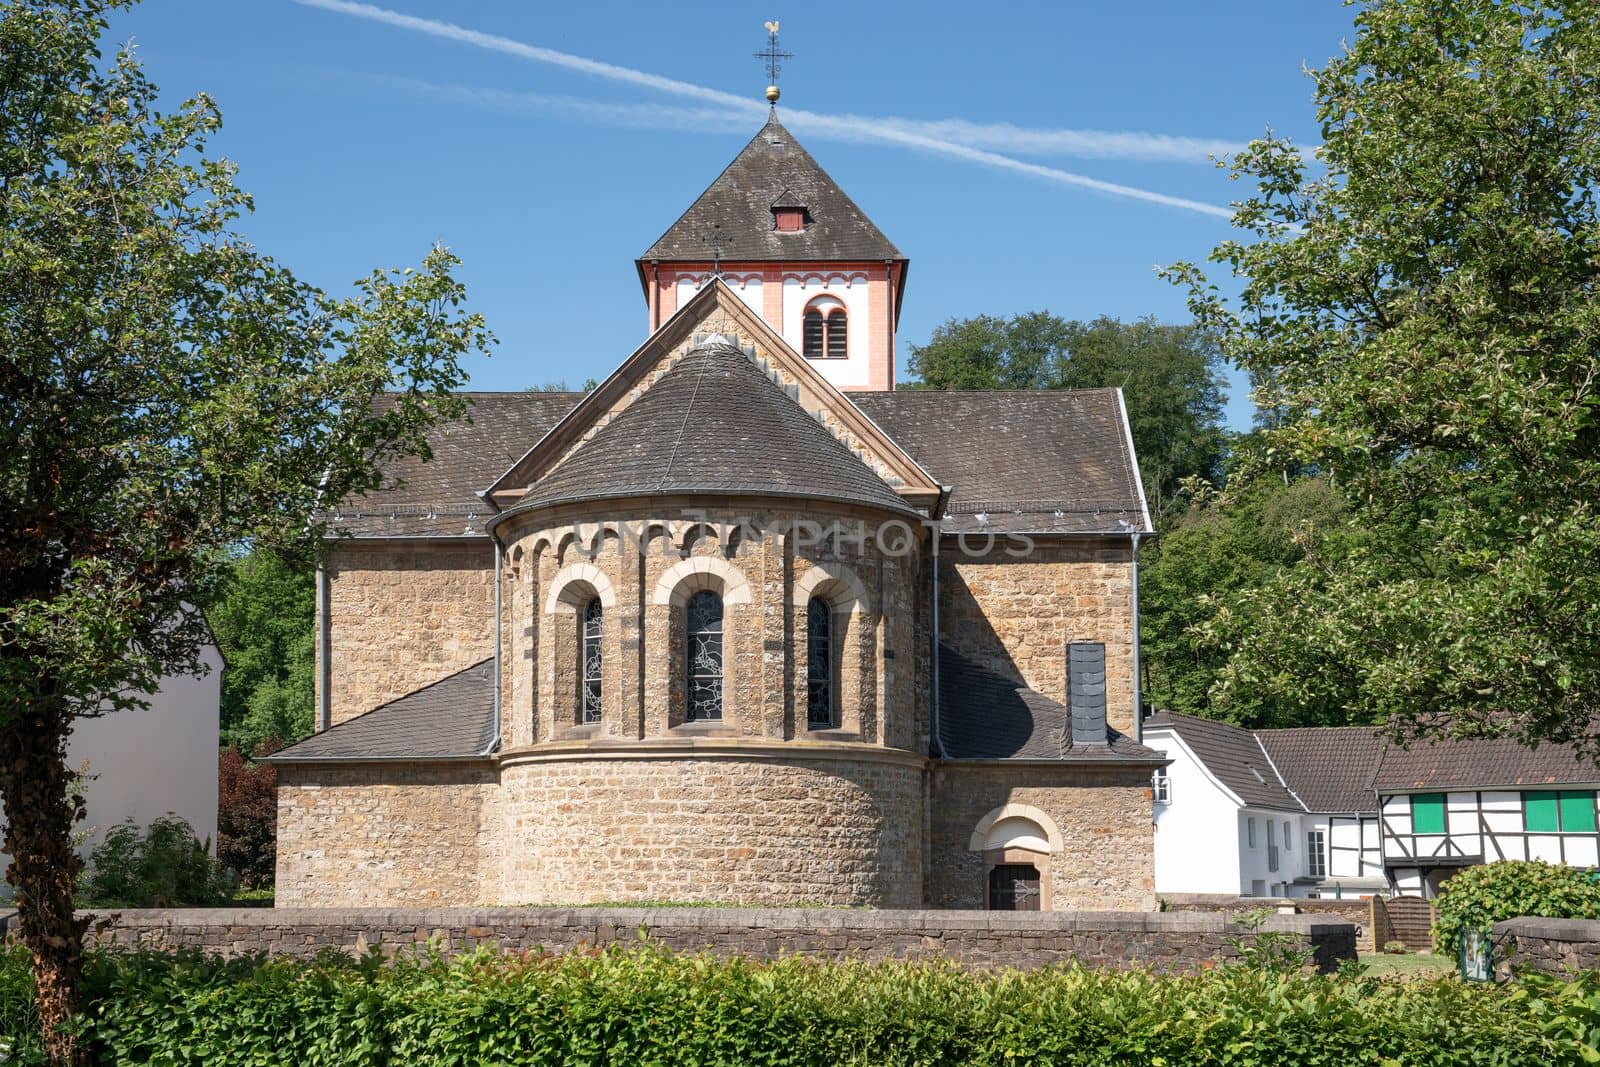 Center of village Odenthal with parish church and old buildings, Bergisches Land, Germany